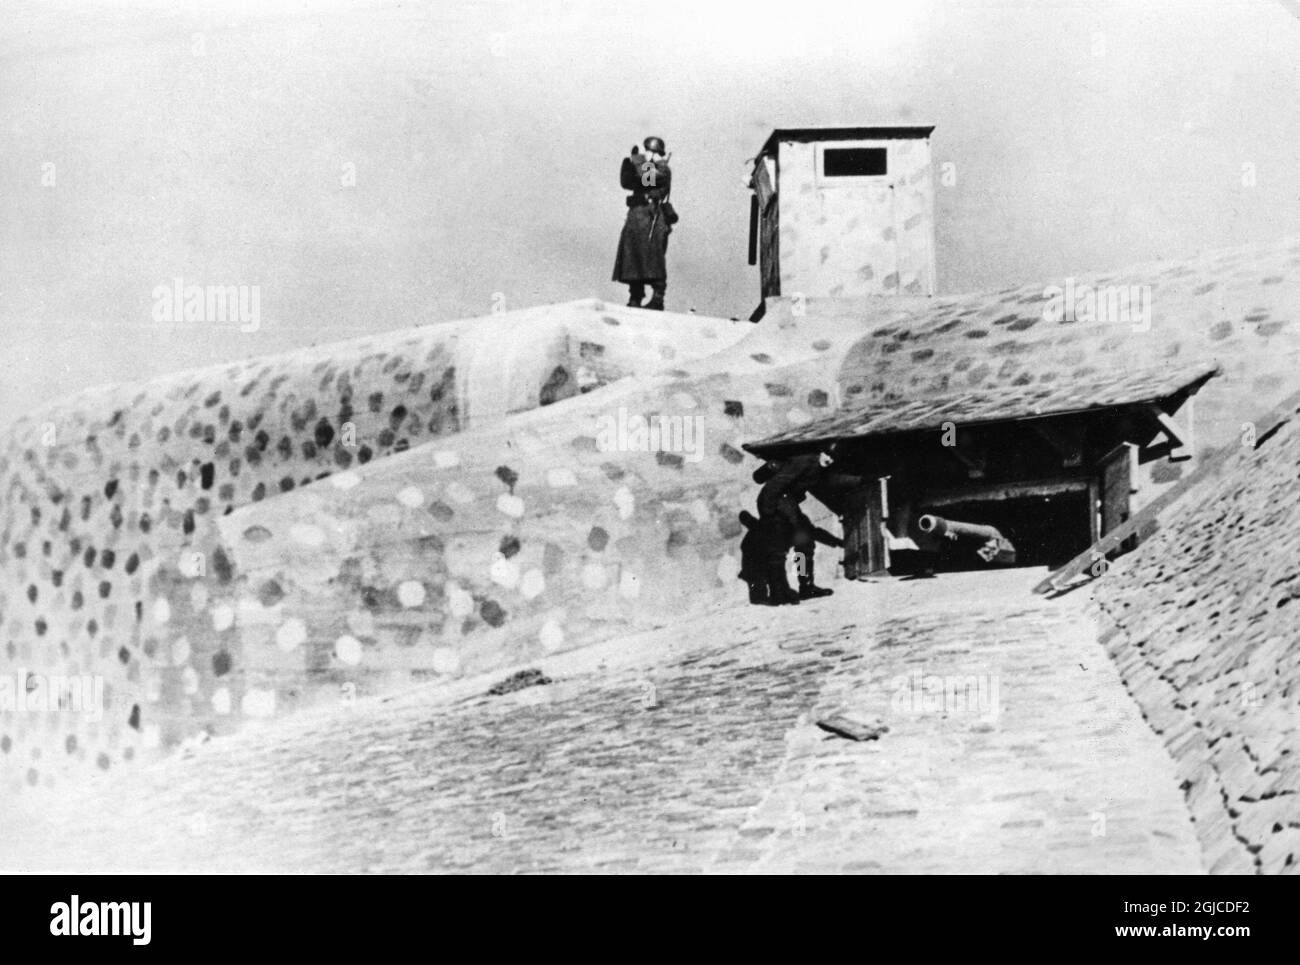 ATLANTIC COAST, FRANCE 1944 Soldier on post at the fortifications in the Atlantic Wall April 1944, during the German occupation of parts of France during the Second World War. Photo: AB Text & Bilder / SVT / Kod: 5600  Stock Photo